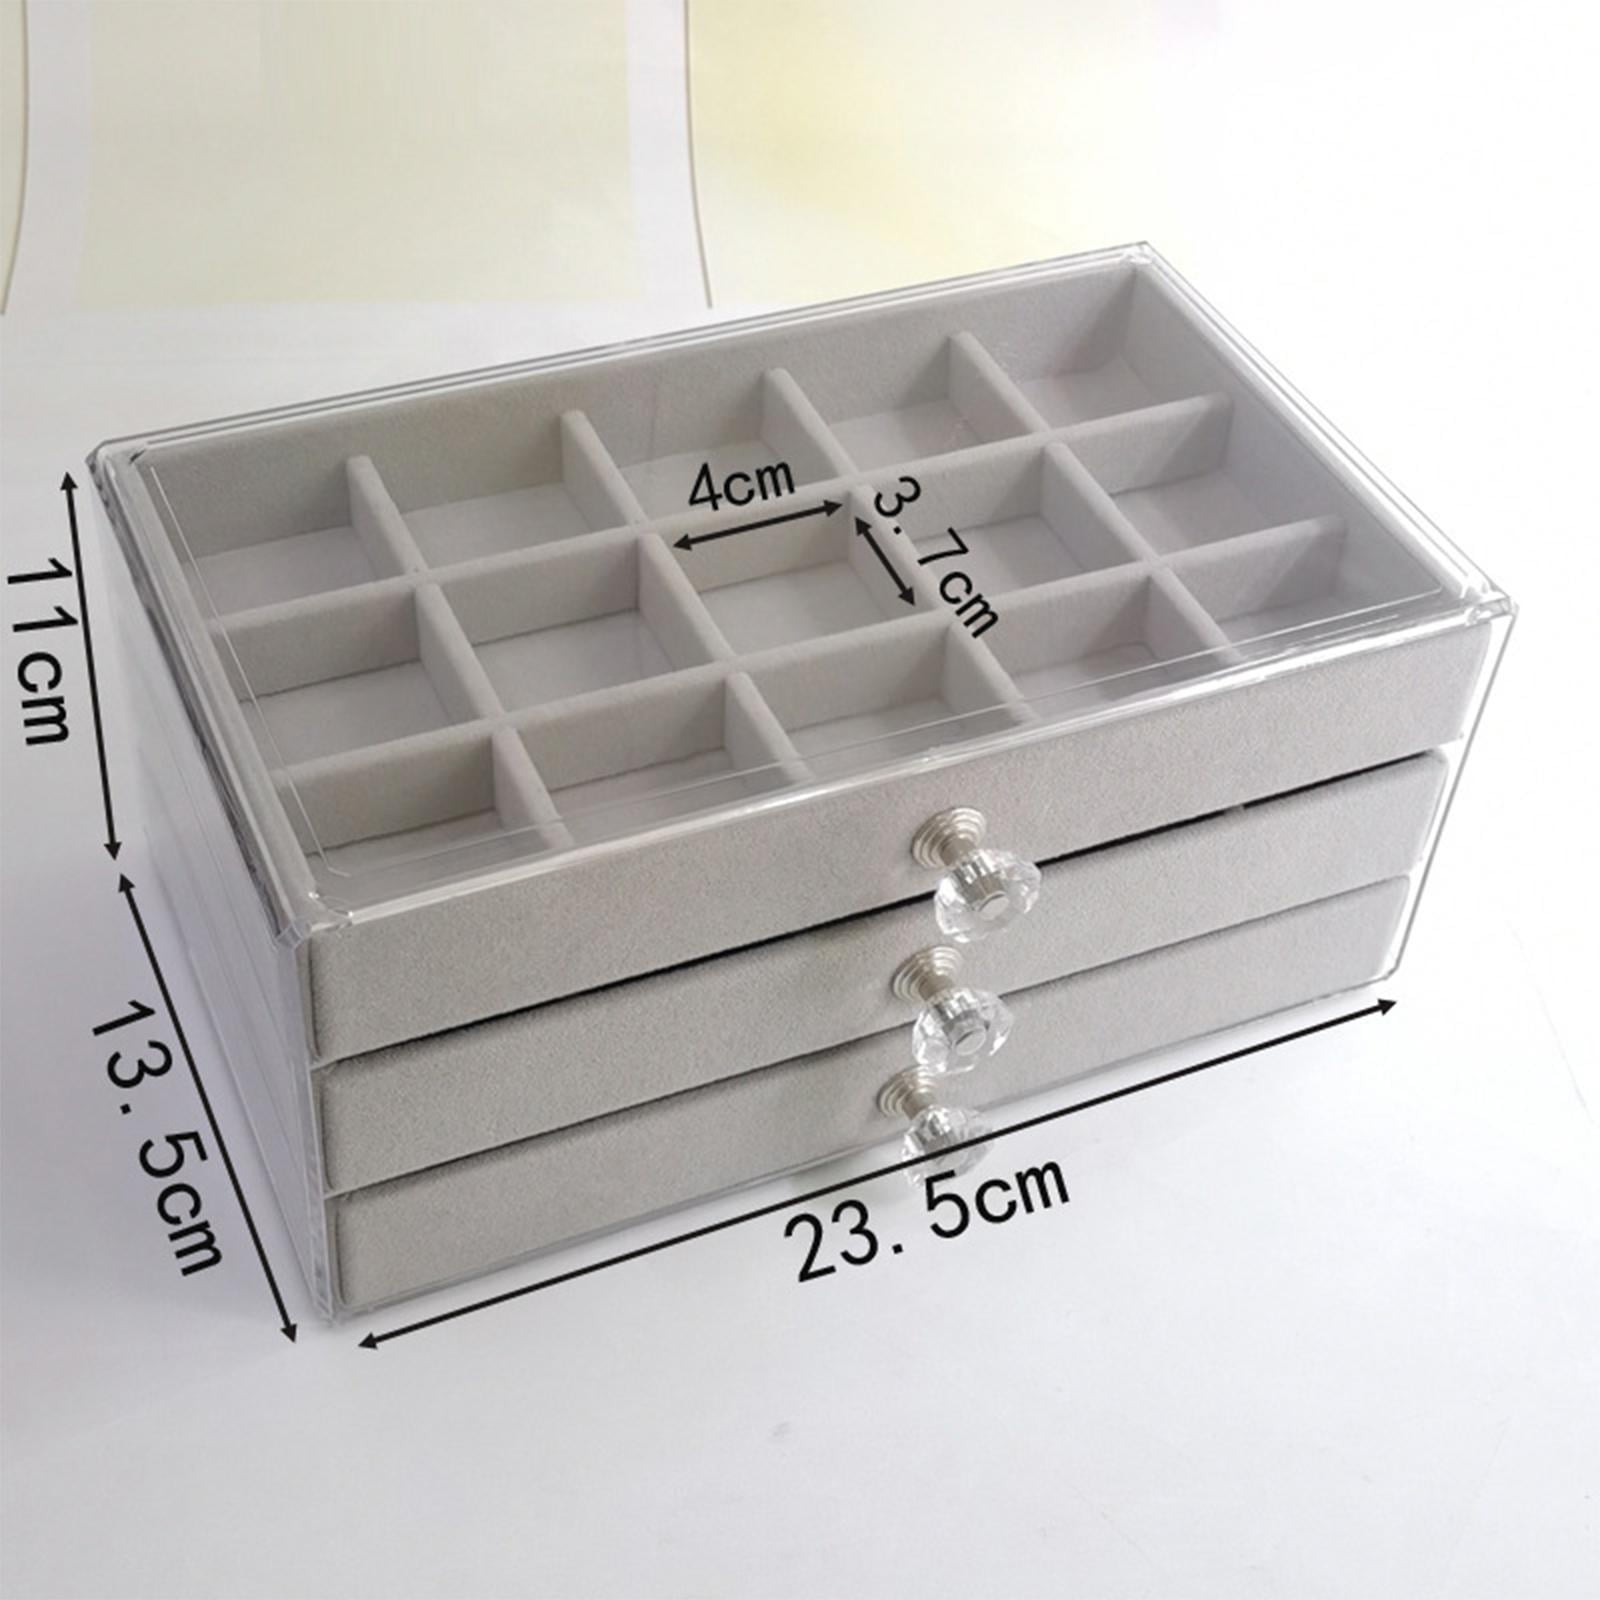 Quality Ring Jewelry Storage Box Portable Grids DIY Beads Organizer Tray  Charms Holder Case Necklace Bracelet Drawer Accessorie